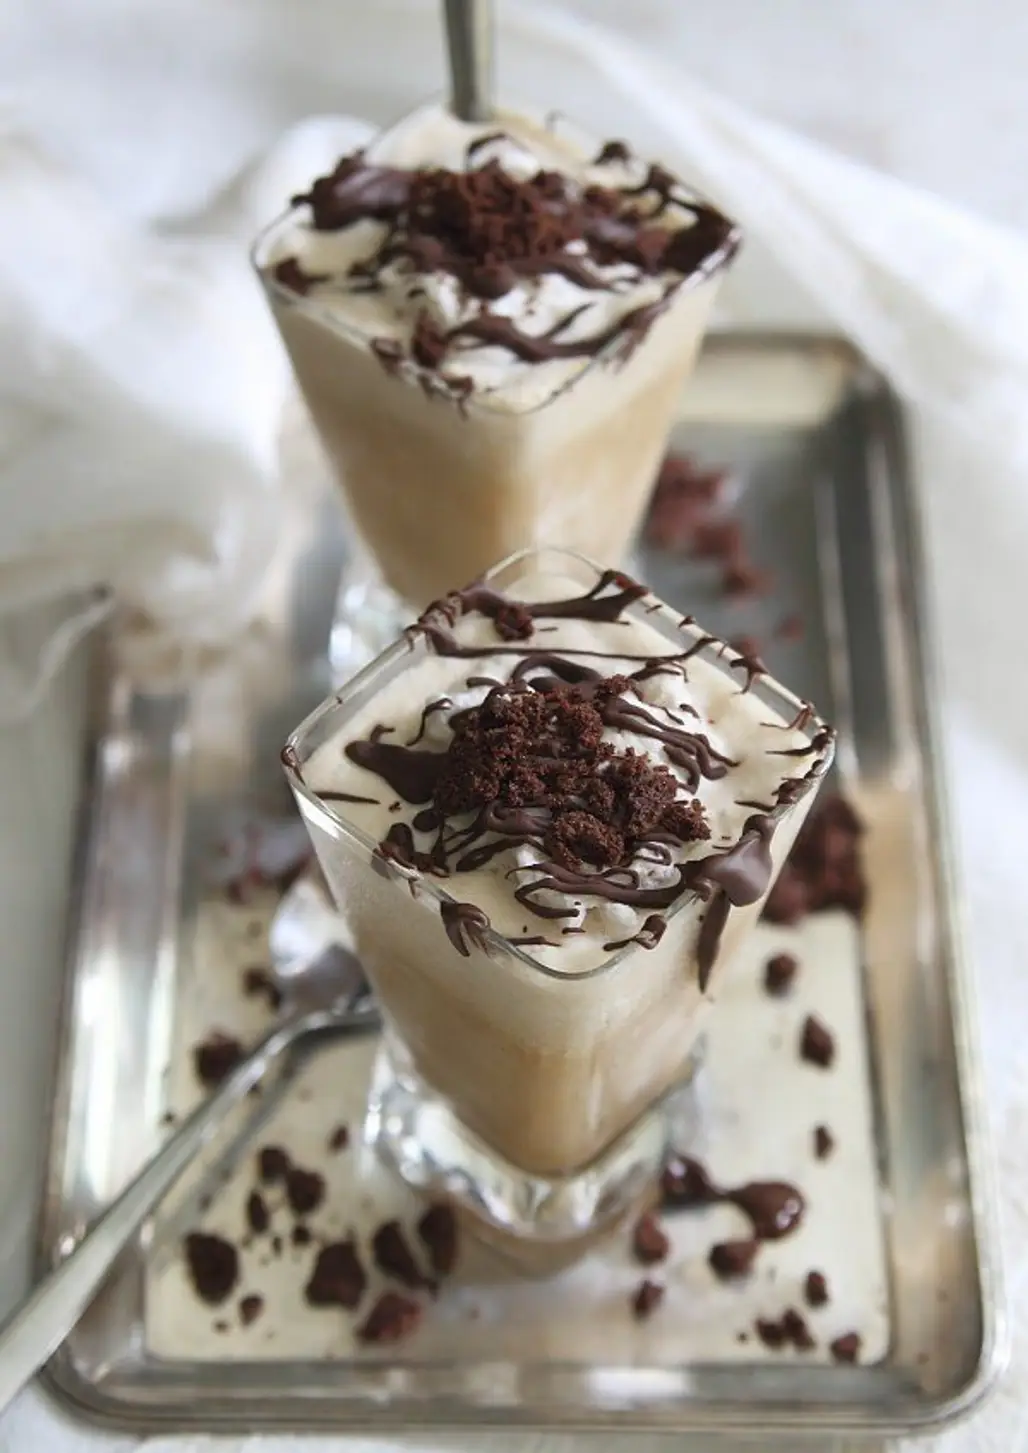 BLENDED CHOCOLATE COCONUT ICED COFFEE